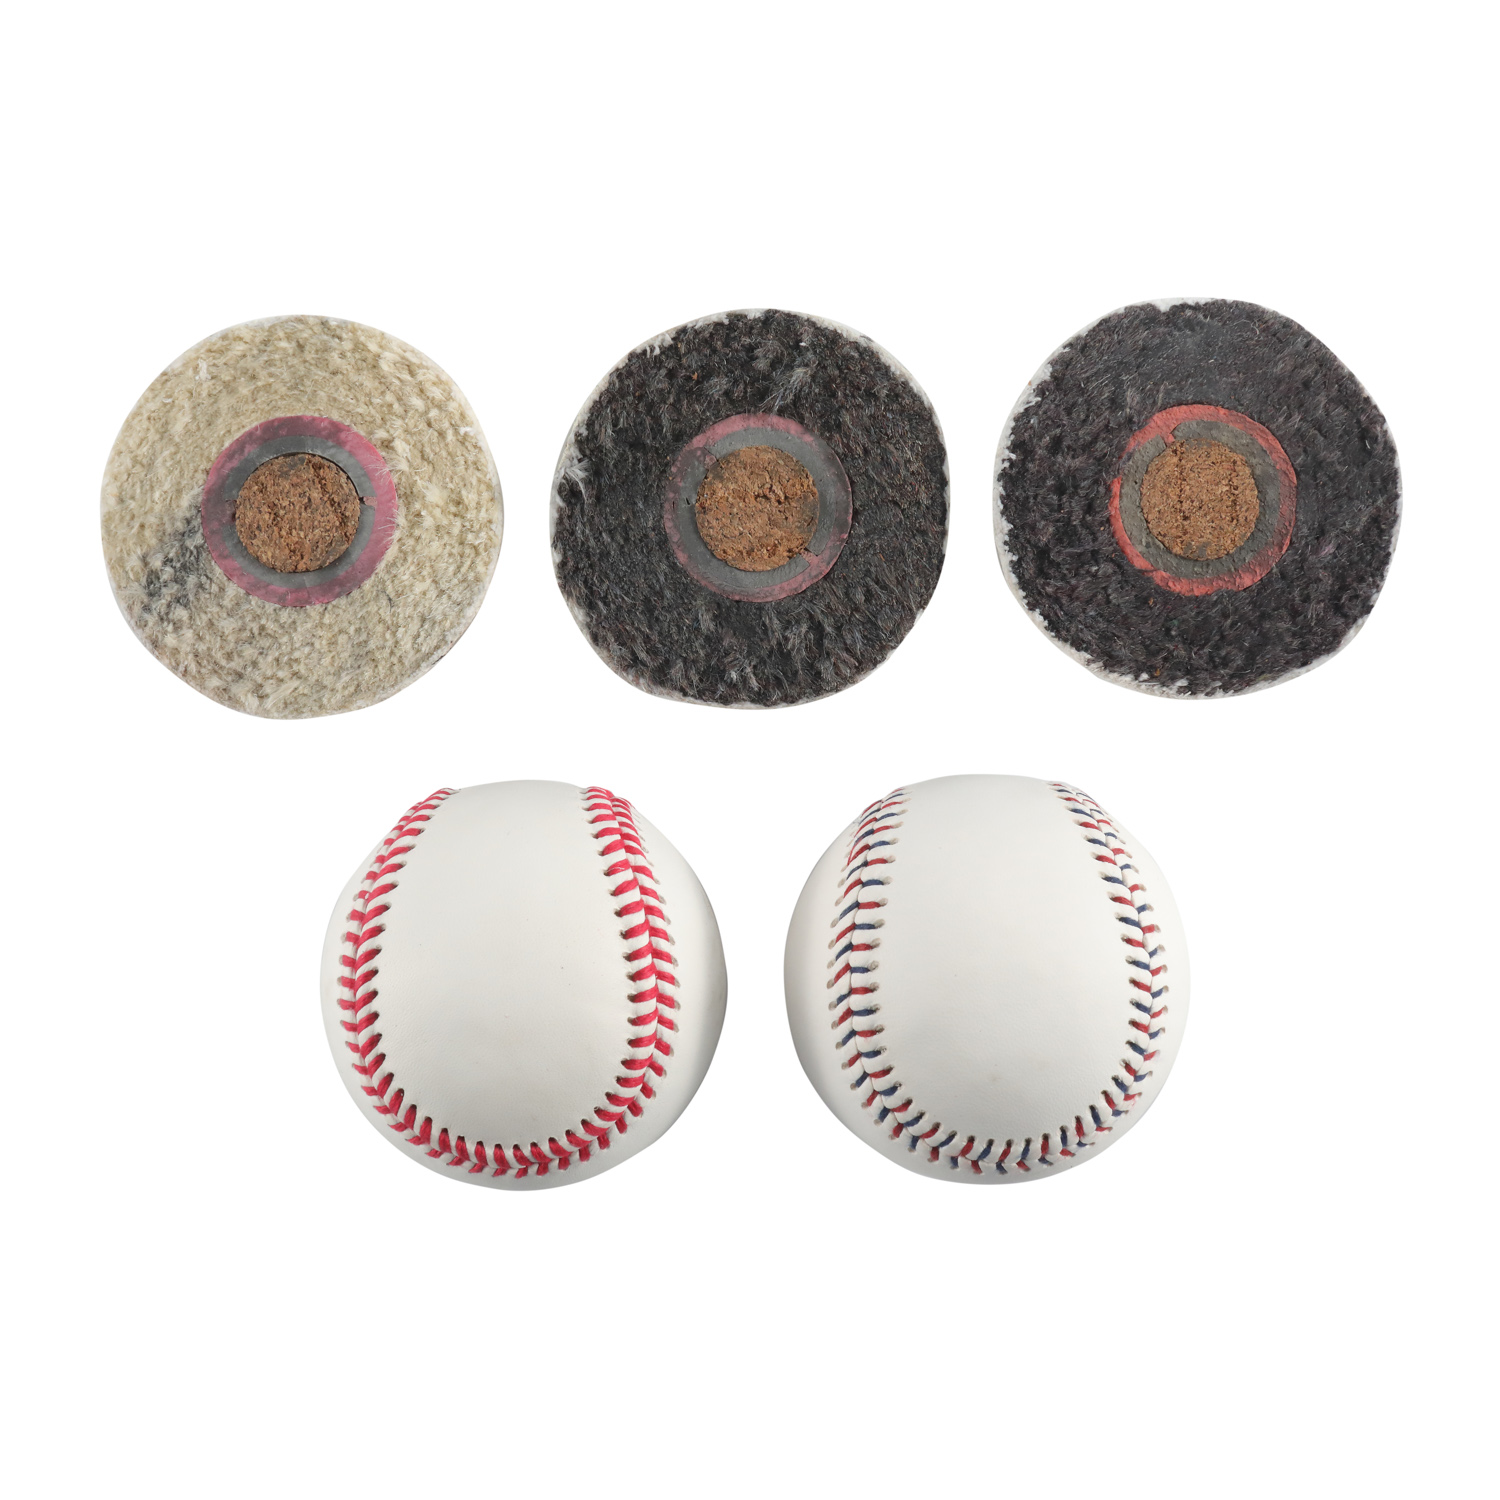 High Quality Professional Official 9 Inch Cowhide Leather Baseball